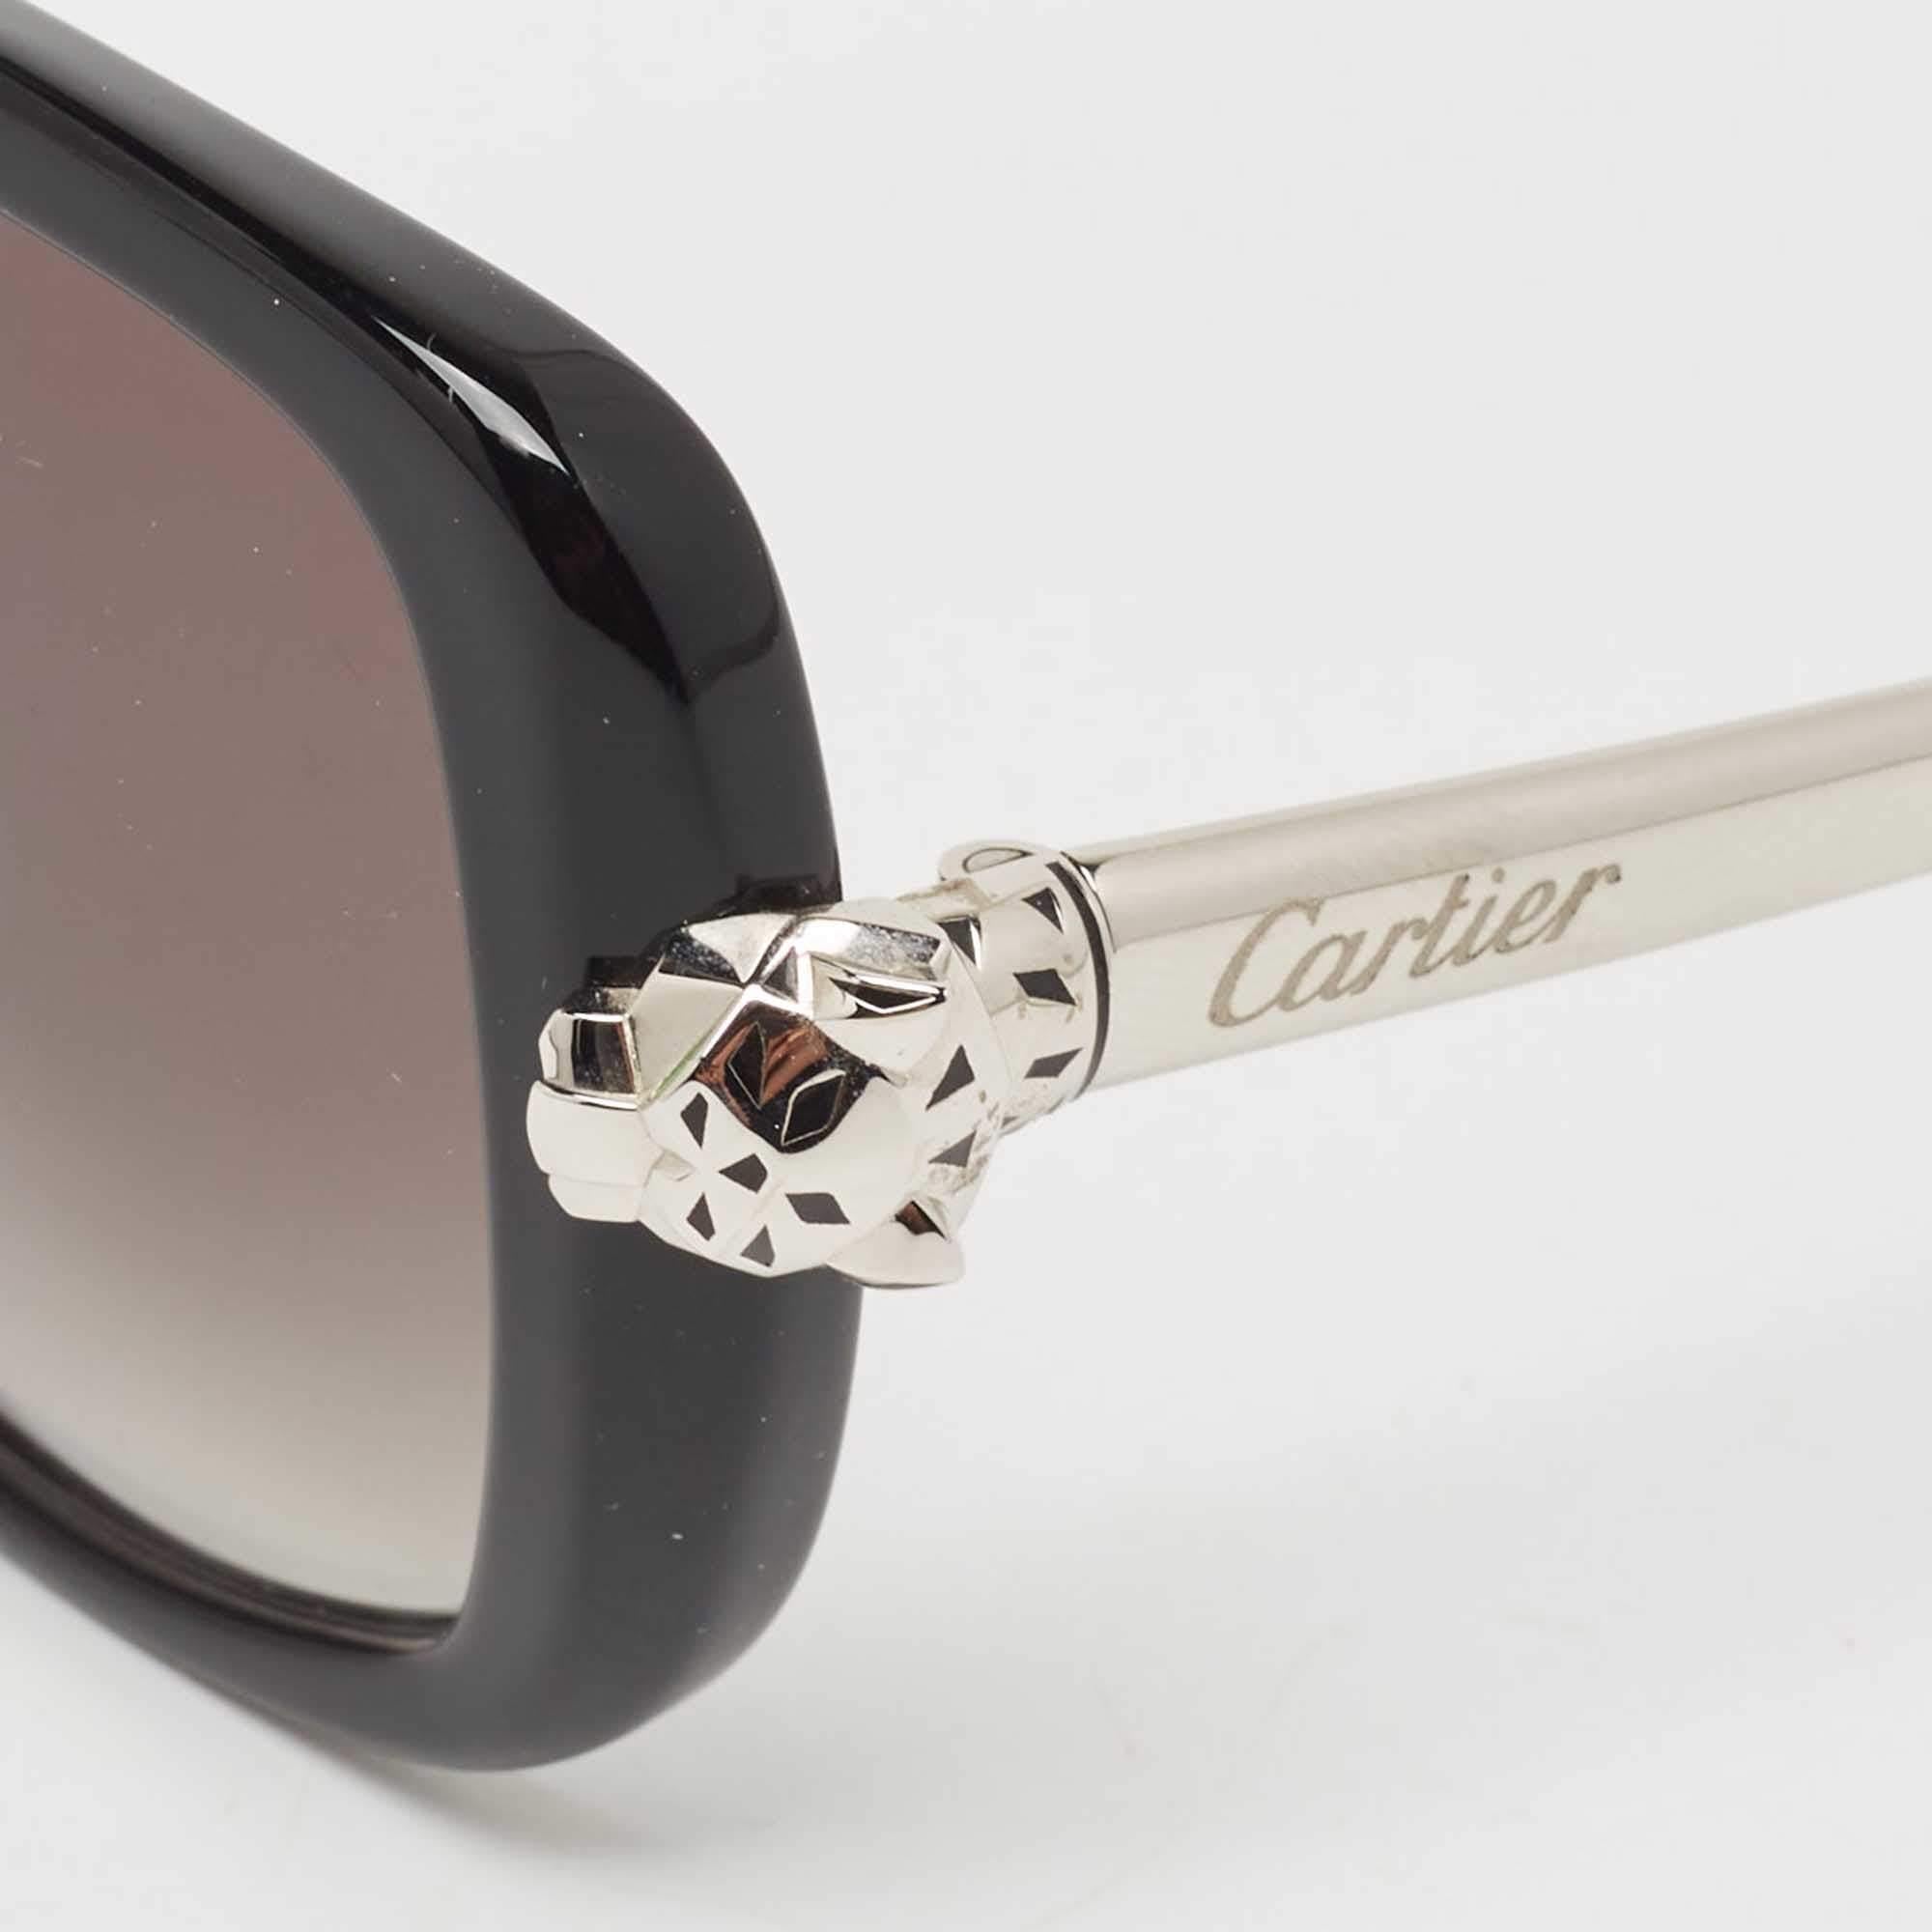 Elevate your eyewear game with these Cartier sunglasses. Meticulously crafted from premium materials, they offer unparalleled protection and a timeless design, making them a must-have accessory for the fashion-forward.

